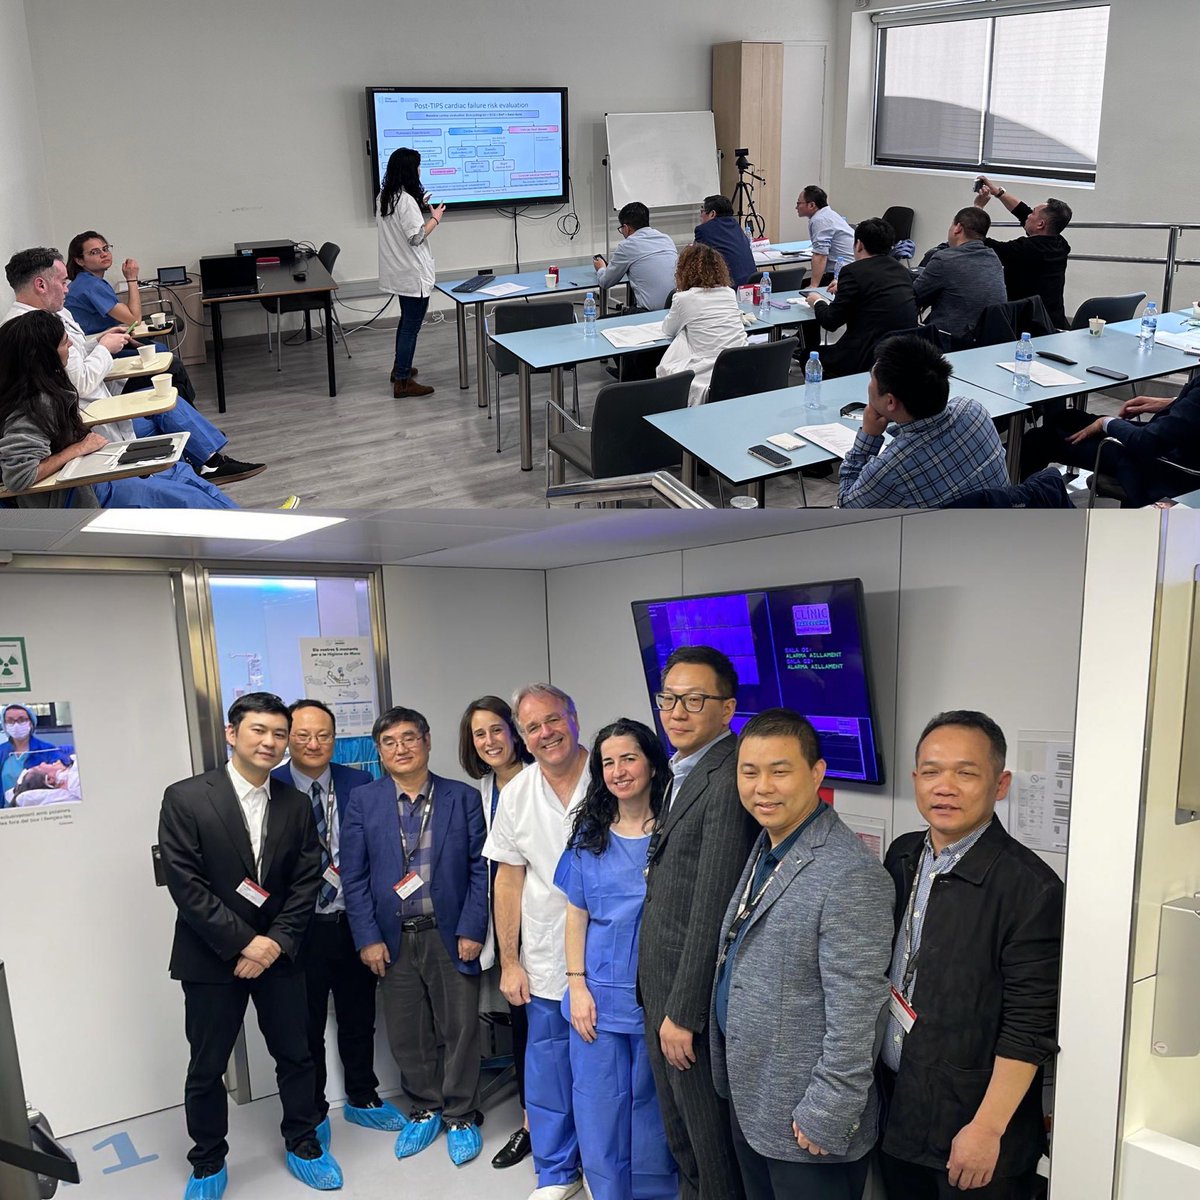 Today and tomorrow a group of physicians from Xina are visiting our unit. Happy to share clinical experiences and knowledge @hospitalclinic @idibaps @CIBERehd @ERN_RARE_LIVER @liverunitclinic